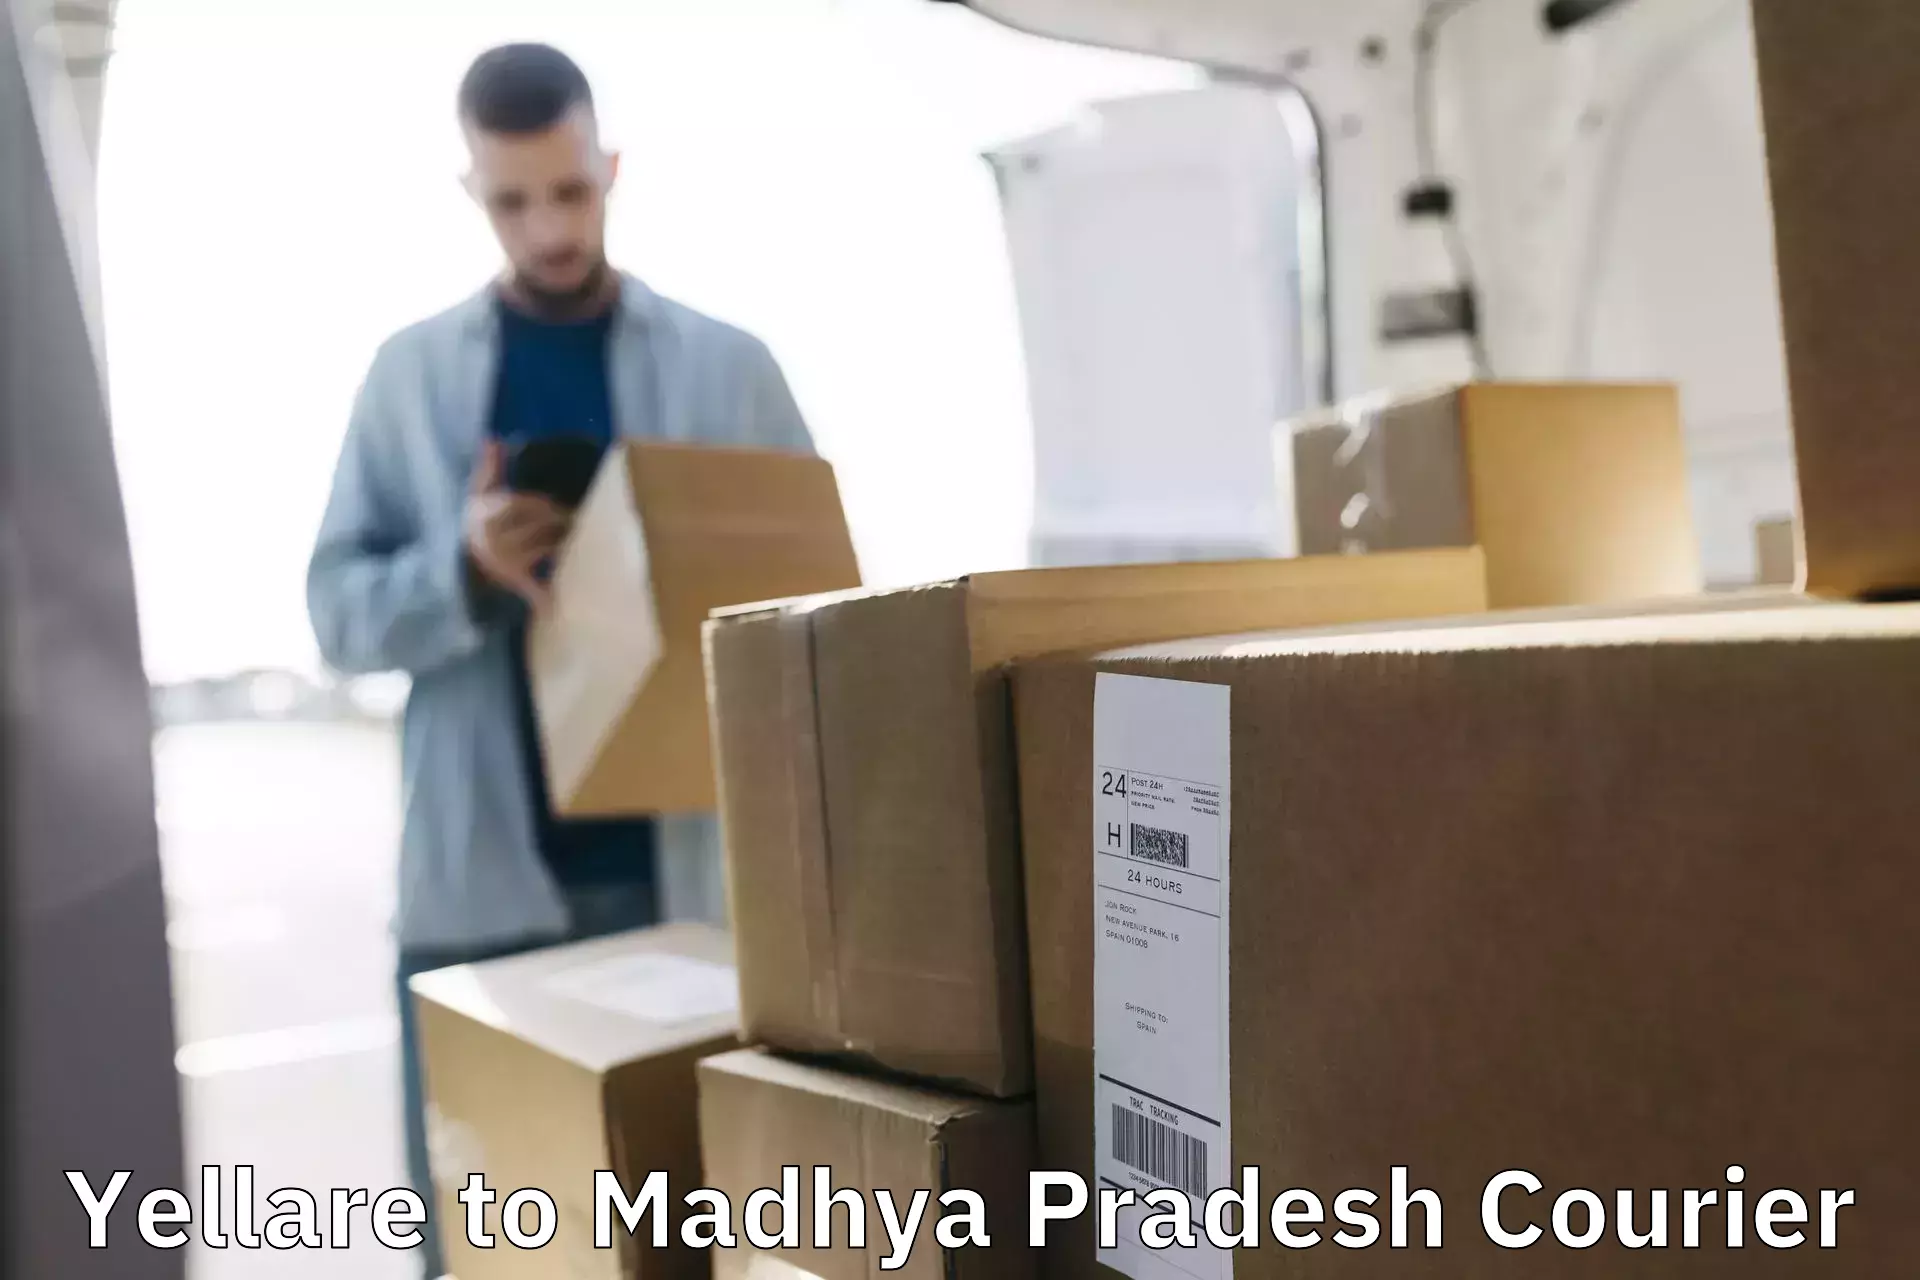 Courier tracking online Yellare to Gwalior